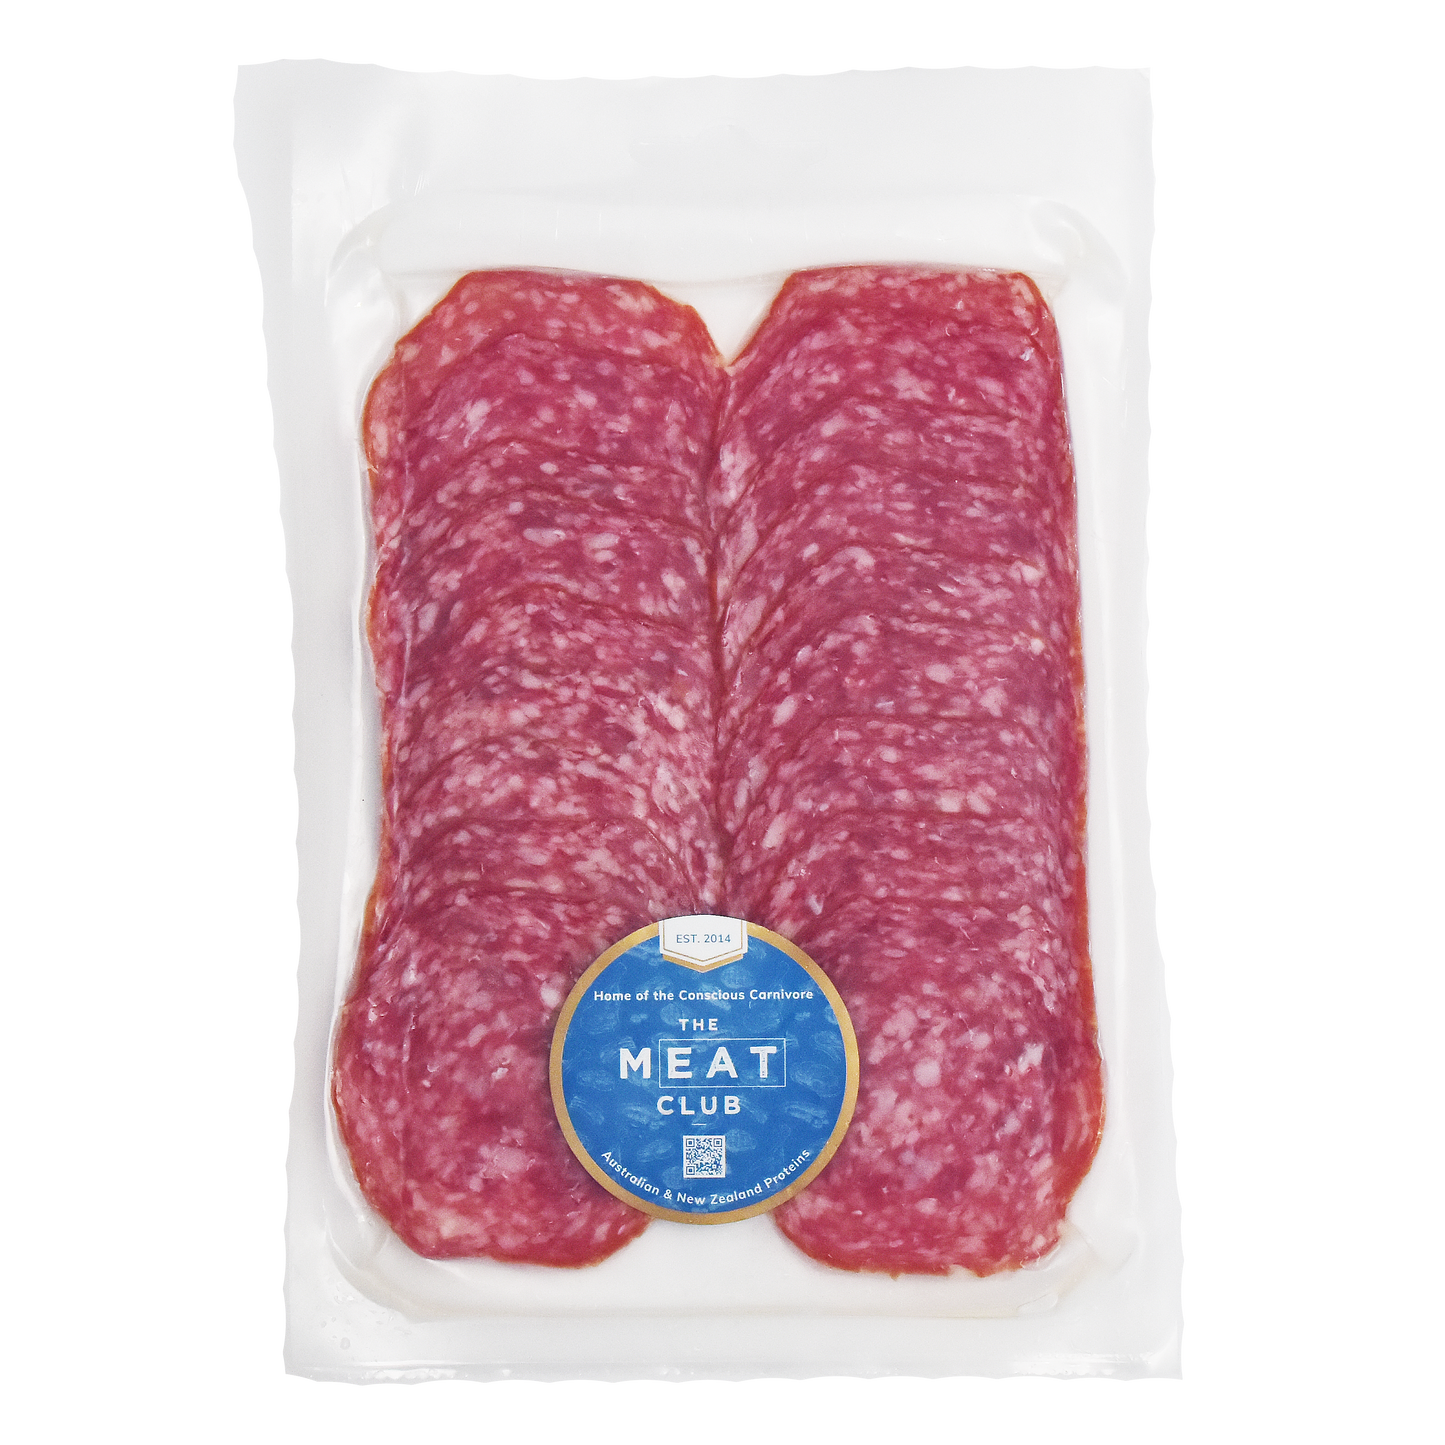 The best Australian Free Range Salami from The Meat Club